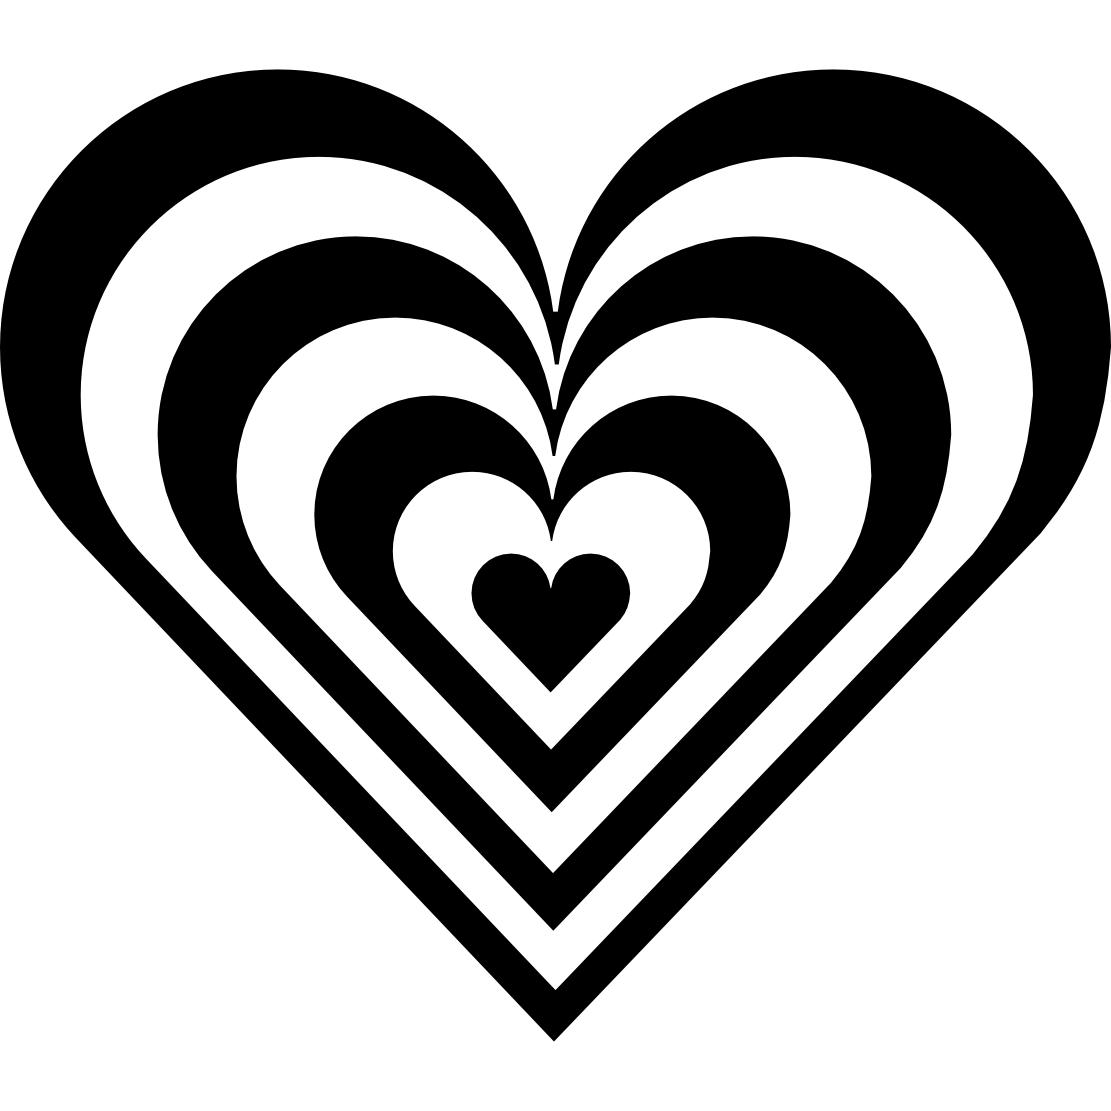 Heart black and white row of 